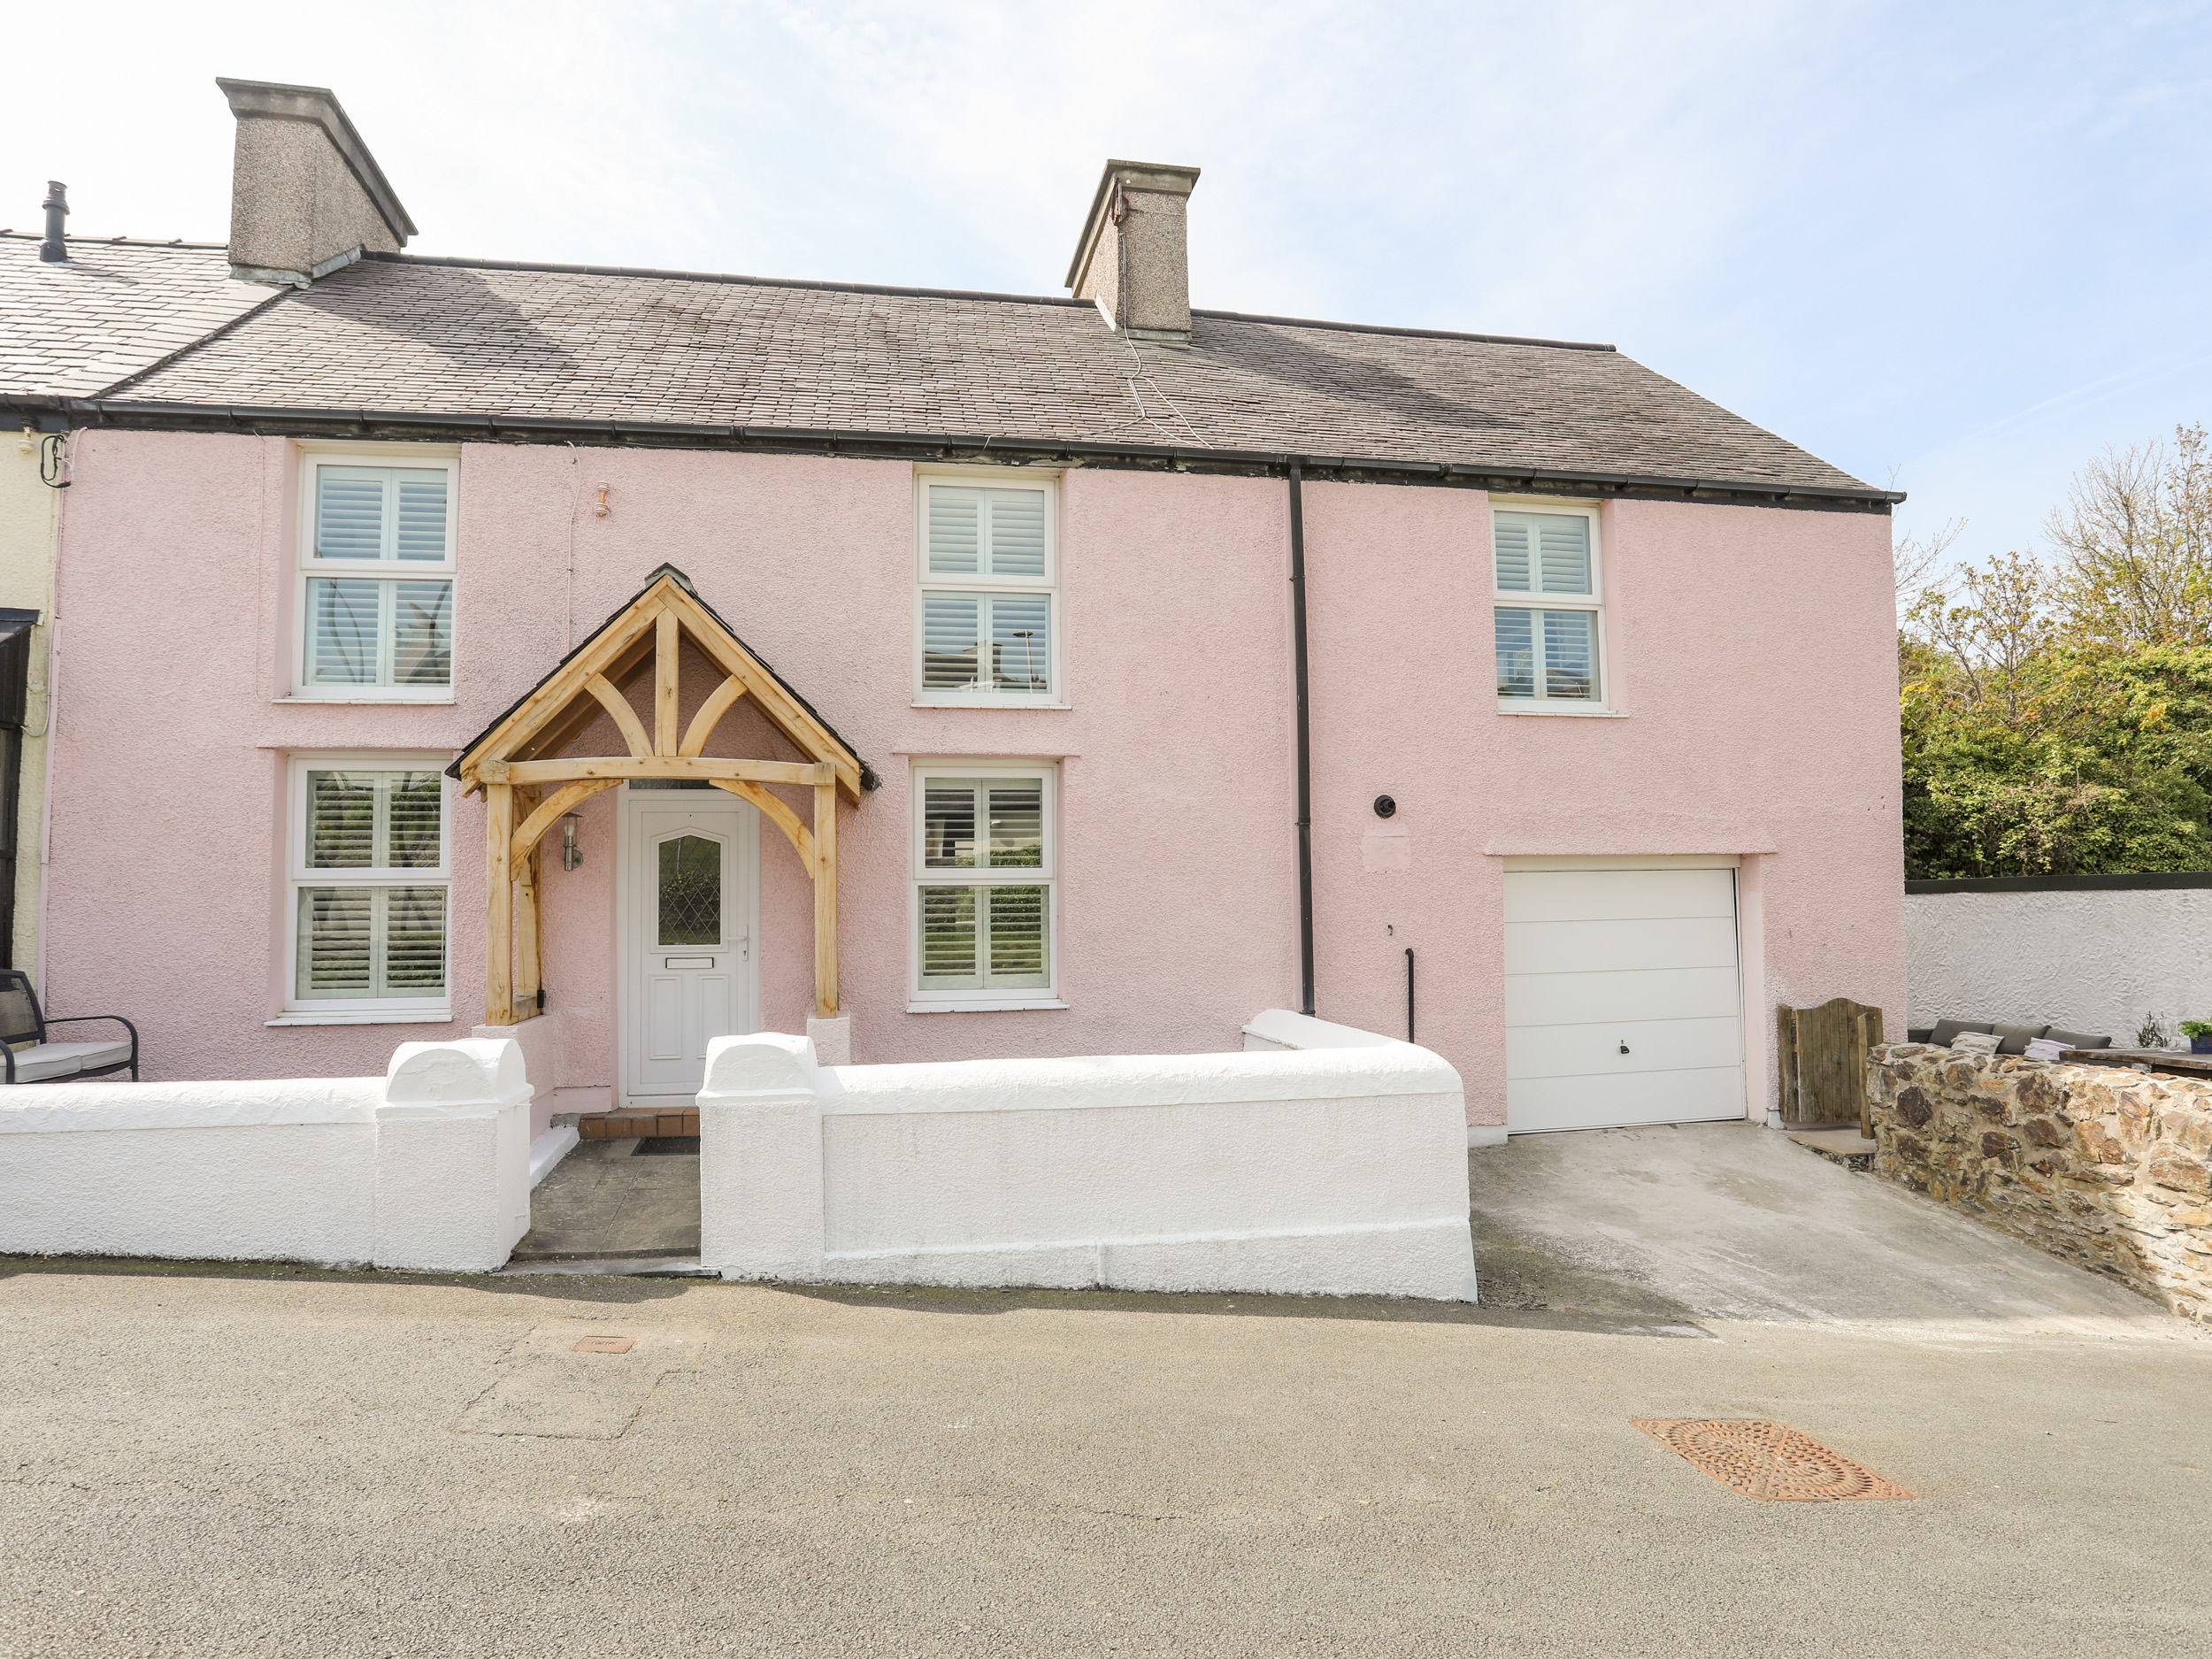 4 bedroom Cottage for rent in Amlwch